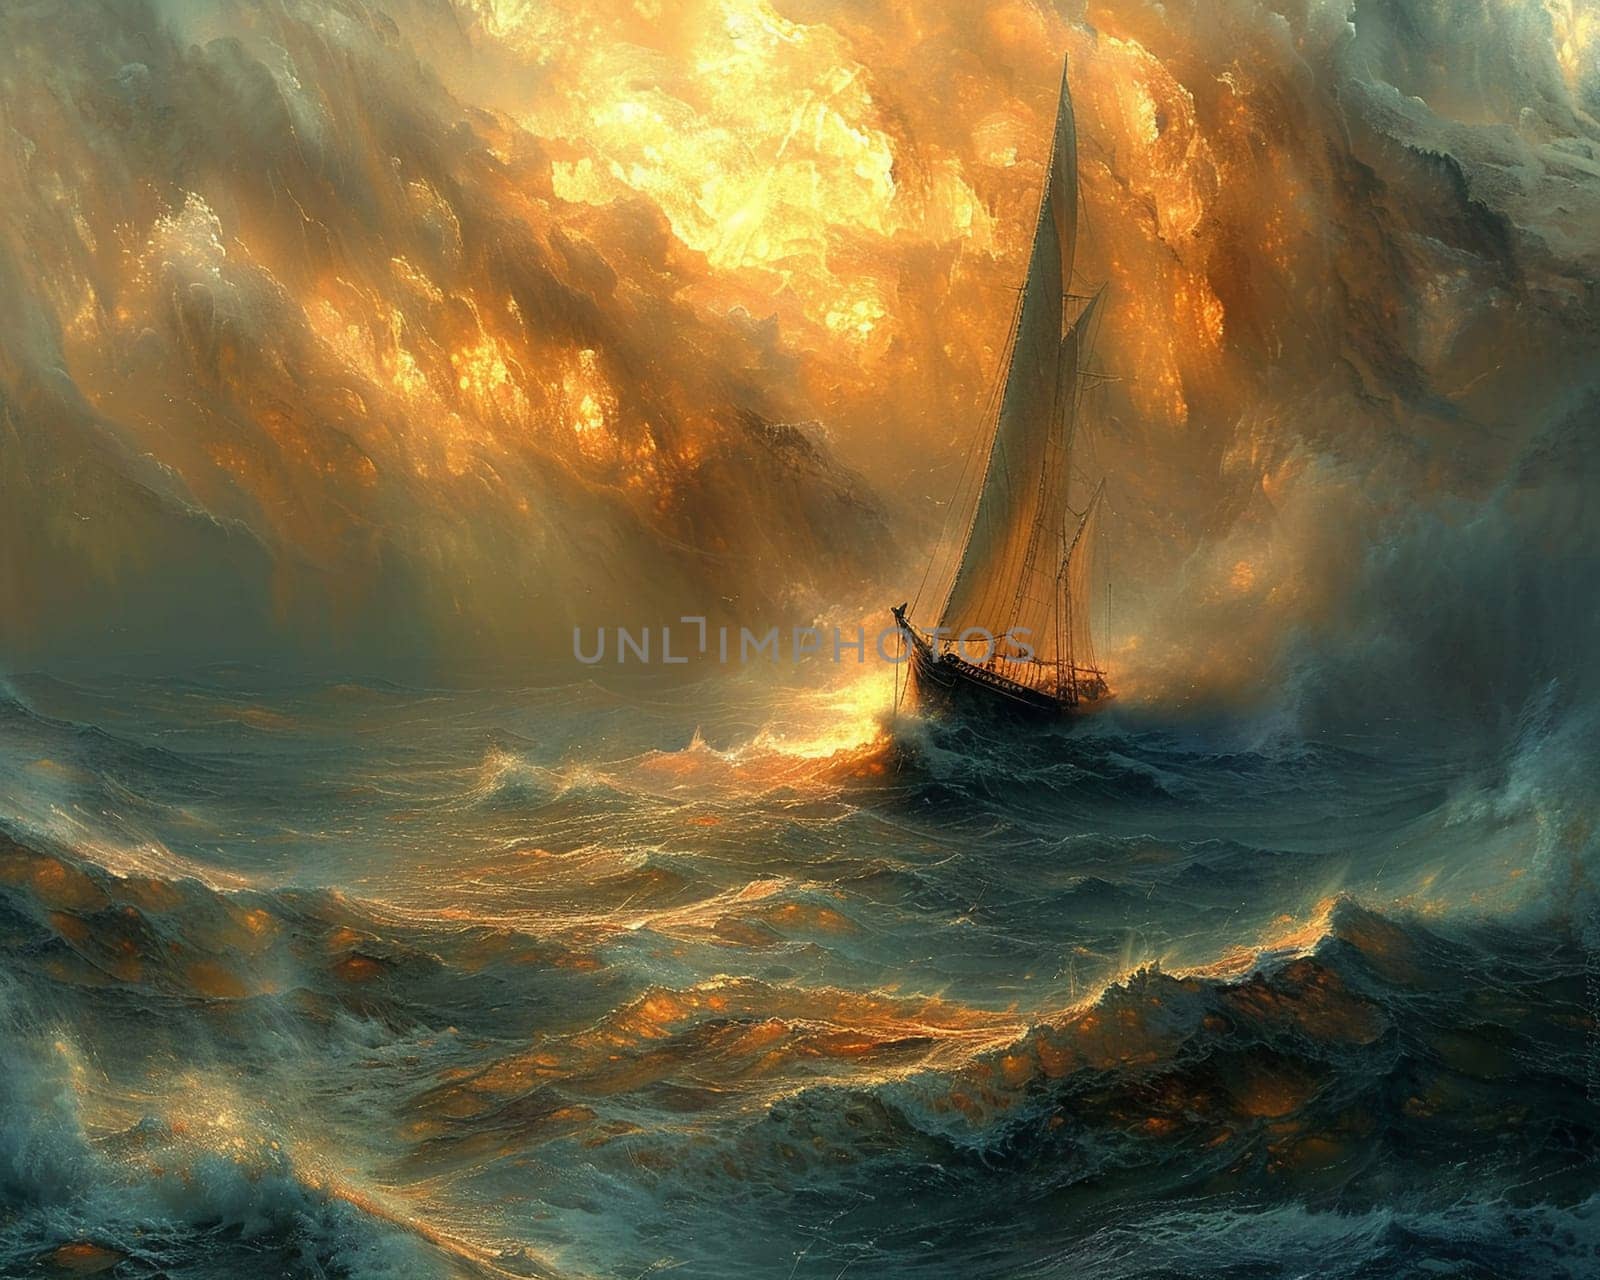 Seafarer adrift in an ocean of dreams, their vessel a craft of hope and horizon.